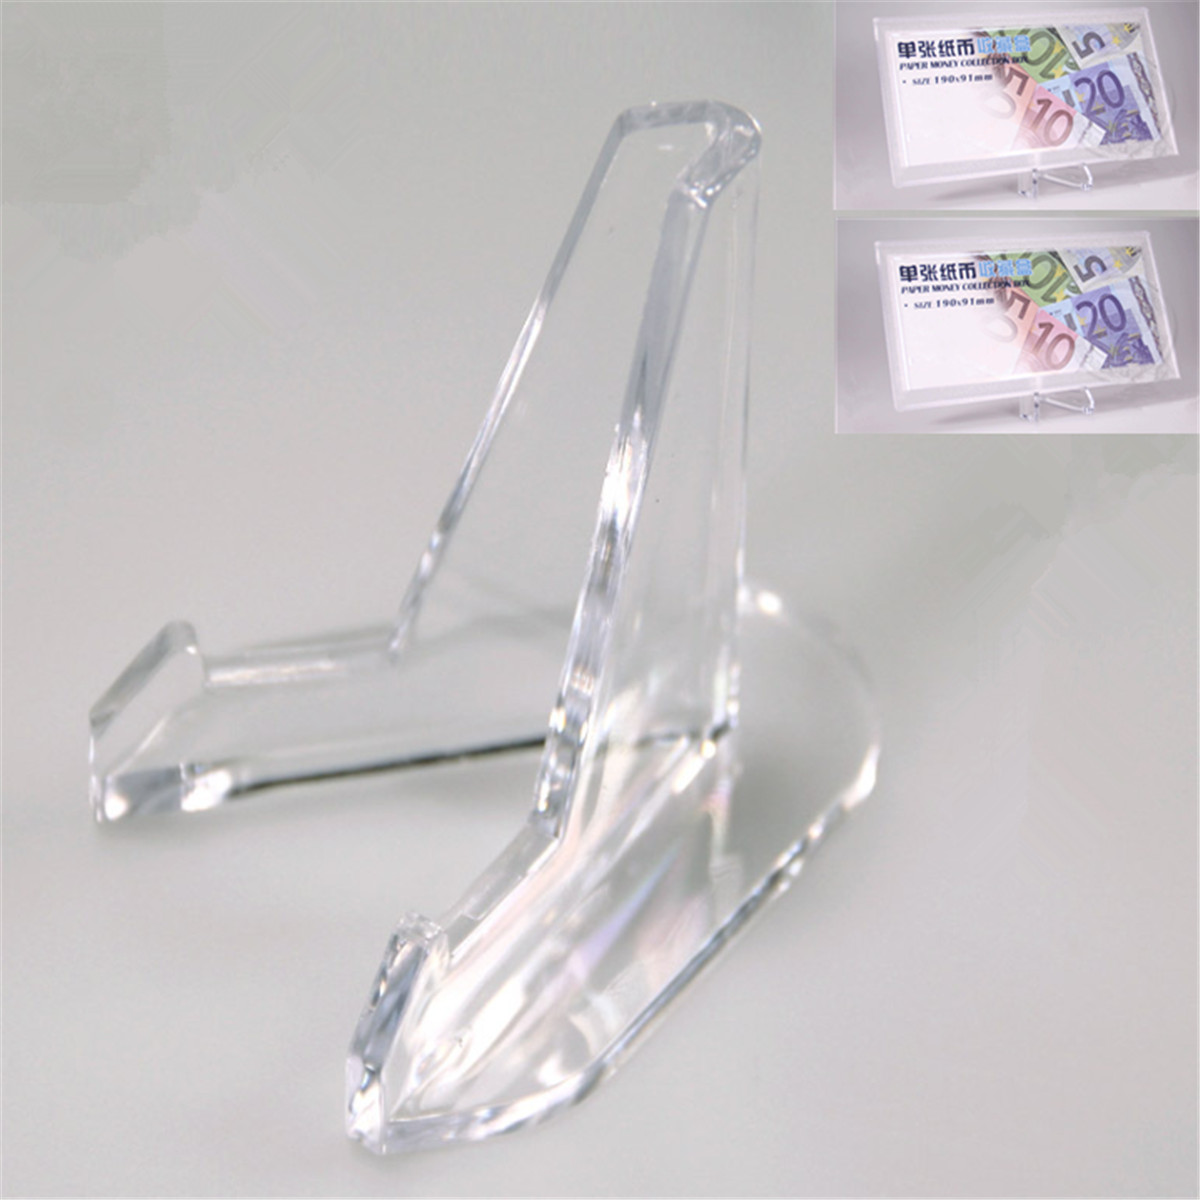 2Pcs S+M Acrylic Clear Coin Display Stand Holder Easel For Coins Cards Tablets